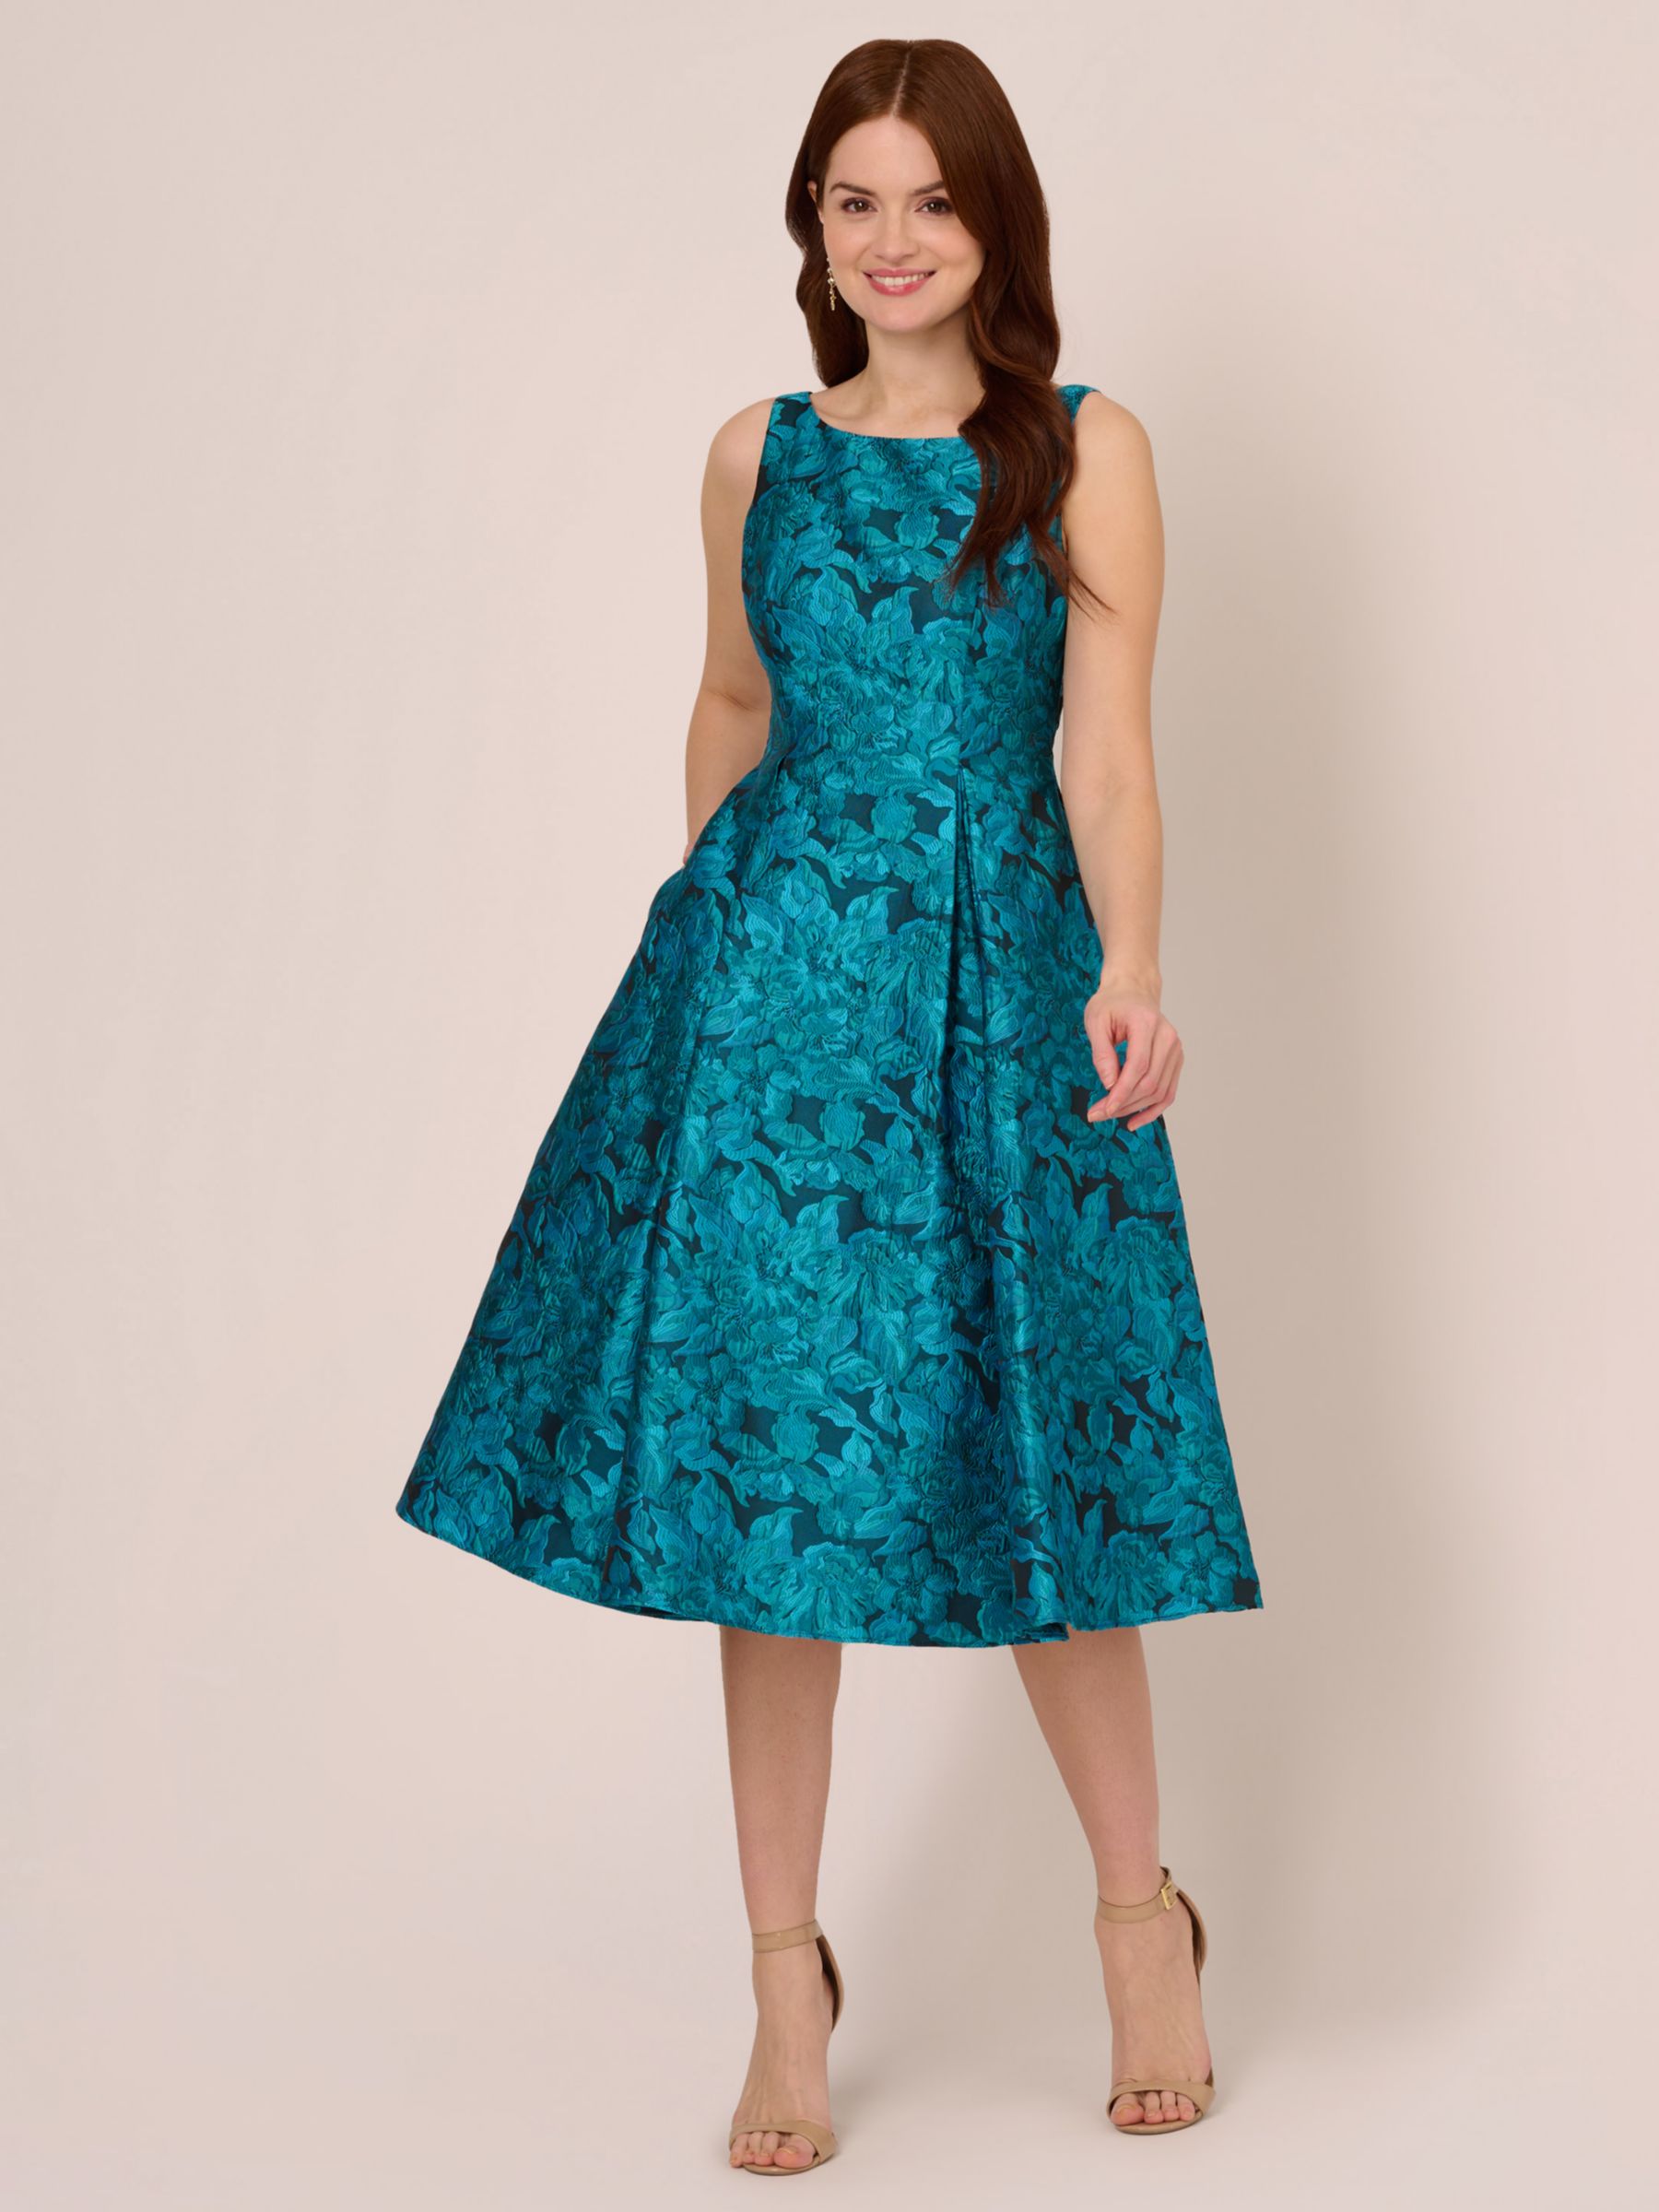 Adrianna Papell Floral Jacquard Flared Dress, Blue